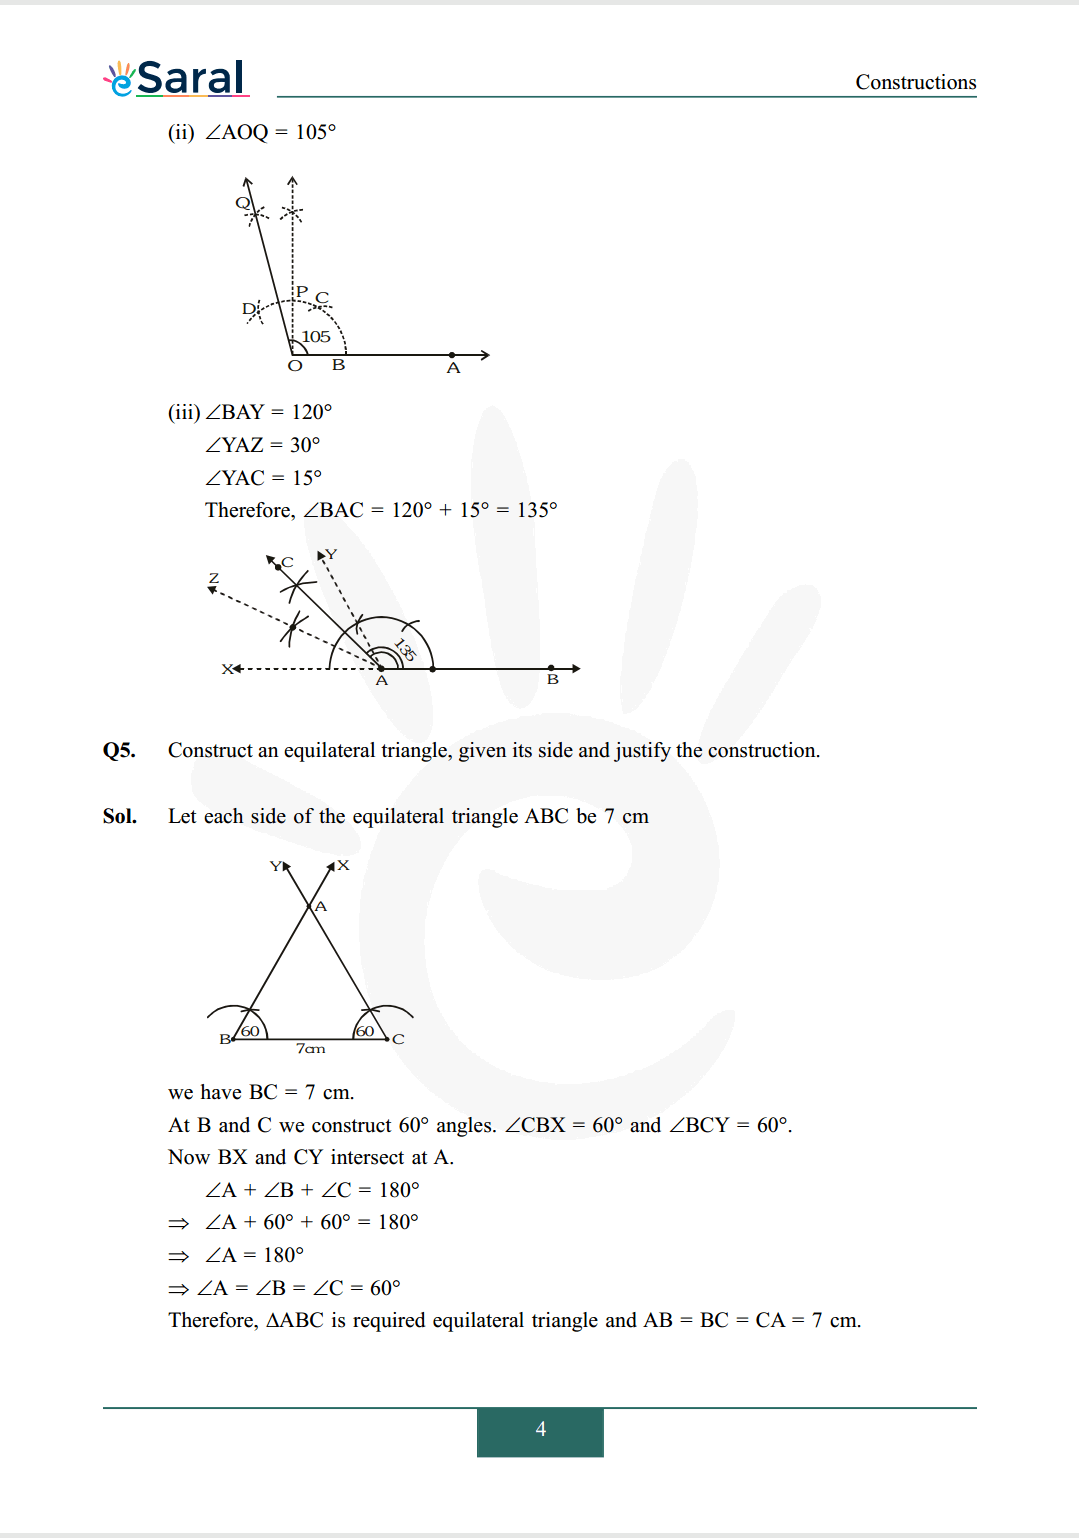 Class 9 maths chapter 11 exercise 11.1 solutions Image 4